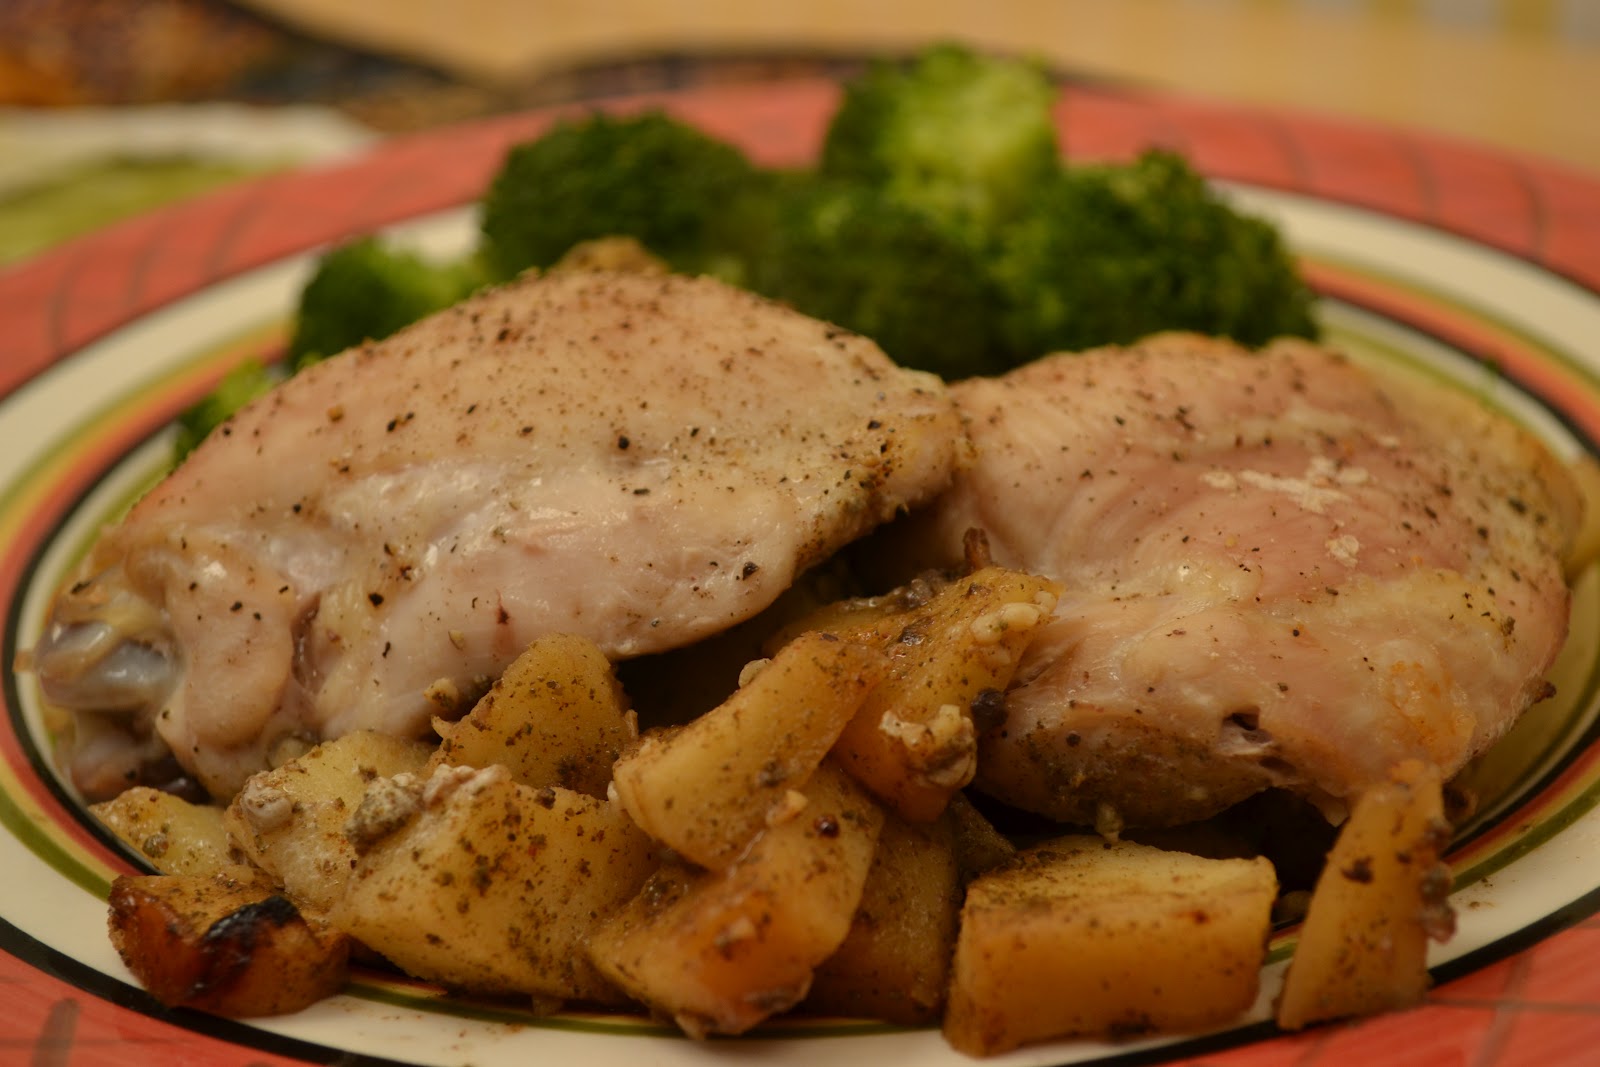 A Taste of Alaska: Roasted Chicken with Apples and Garlic